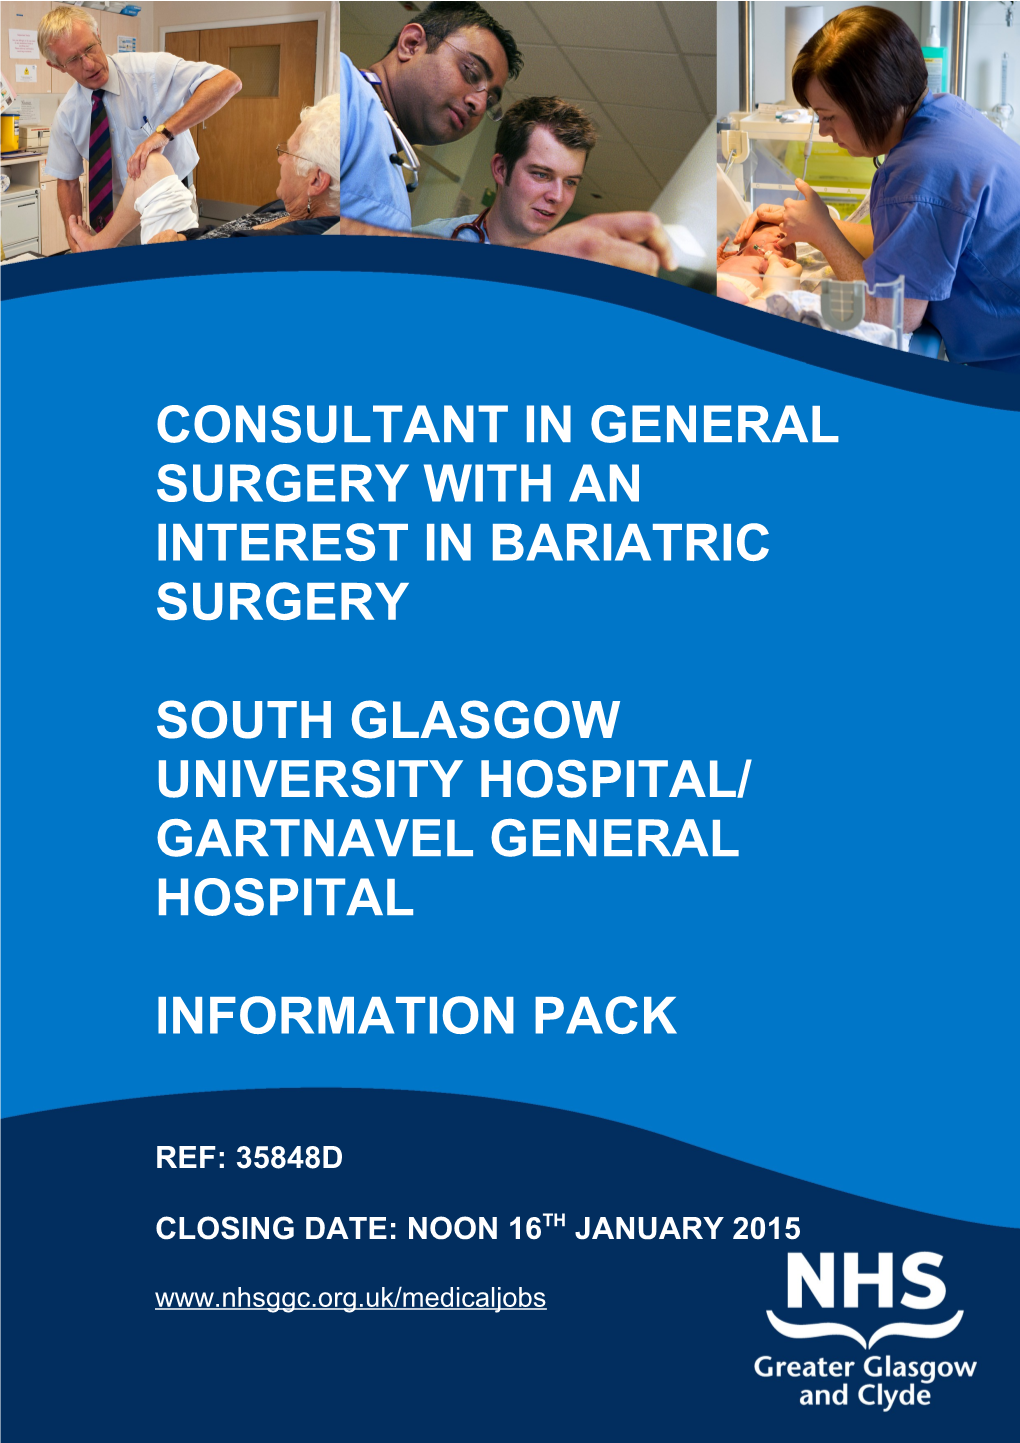 Consultant in General SURGERY with an Interest in Bariatric Surgery